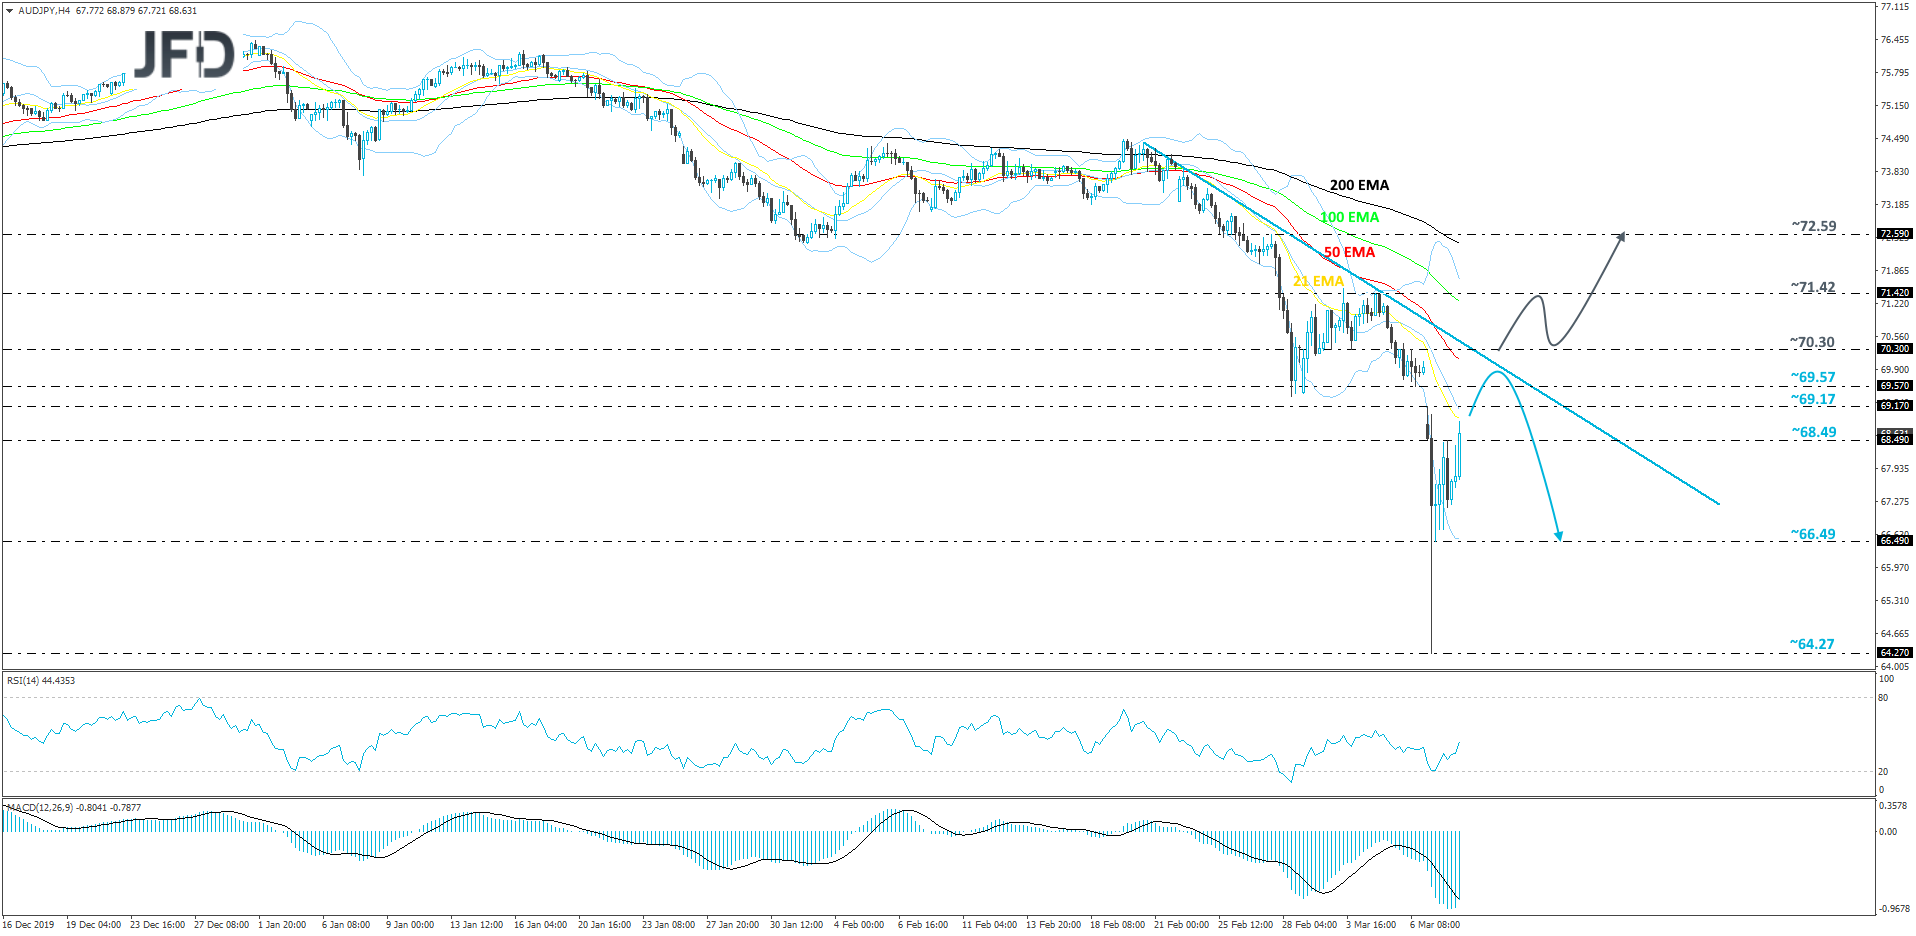 AUD/JPY 4-hour chart technical analysis